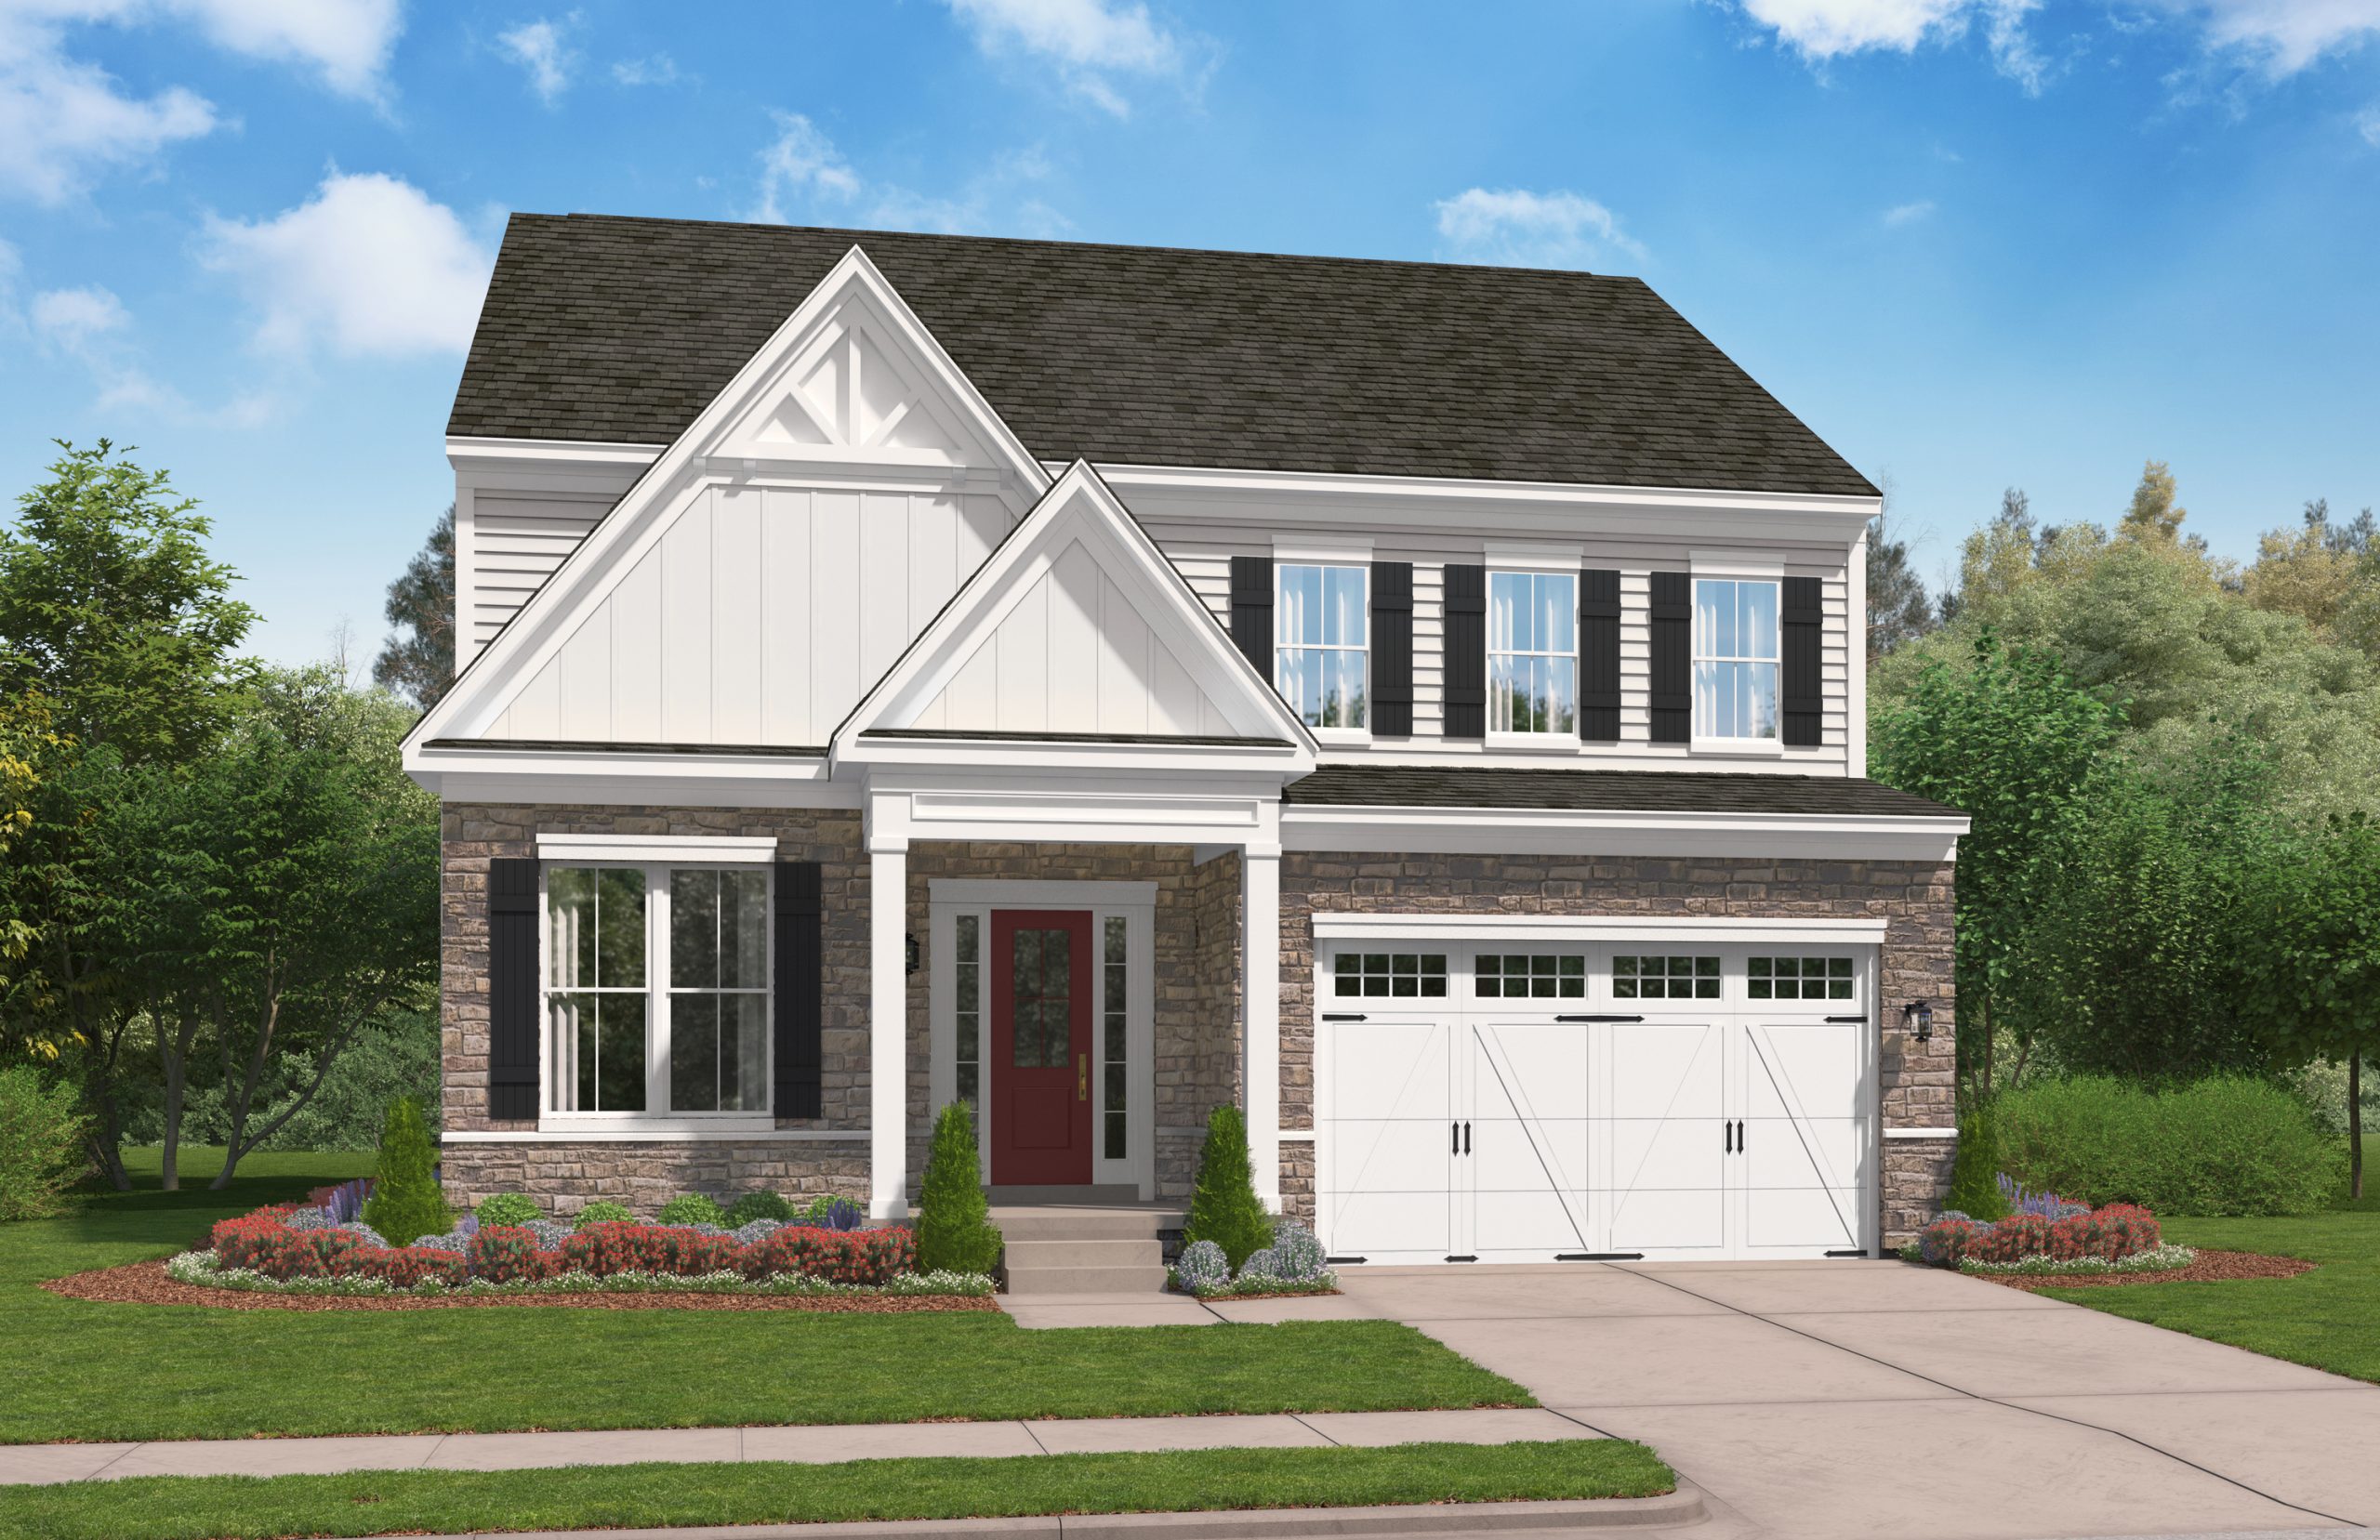 Stanley Martin Custom Homes can build a Sienna Model on your lot in Northern Virginia or Montgomery County, Maryland.